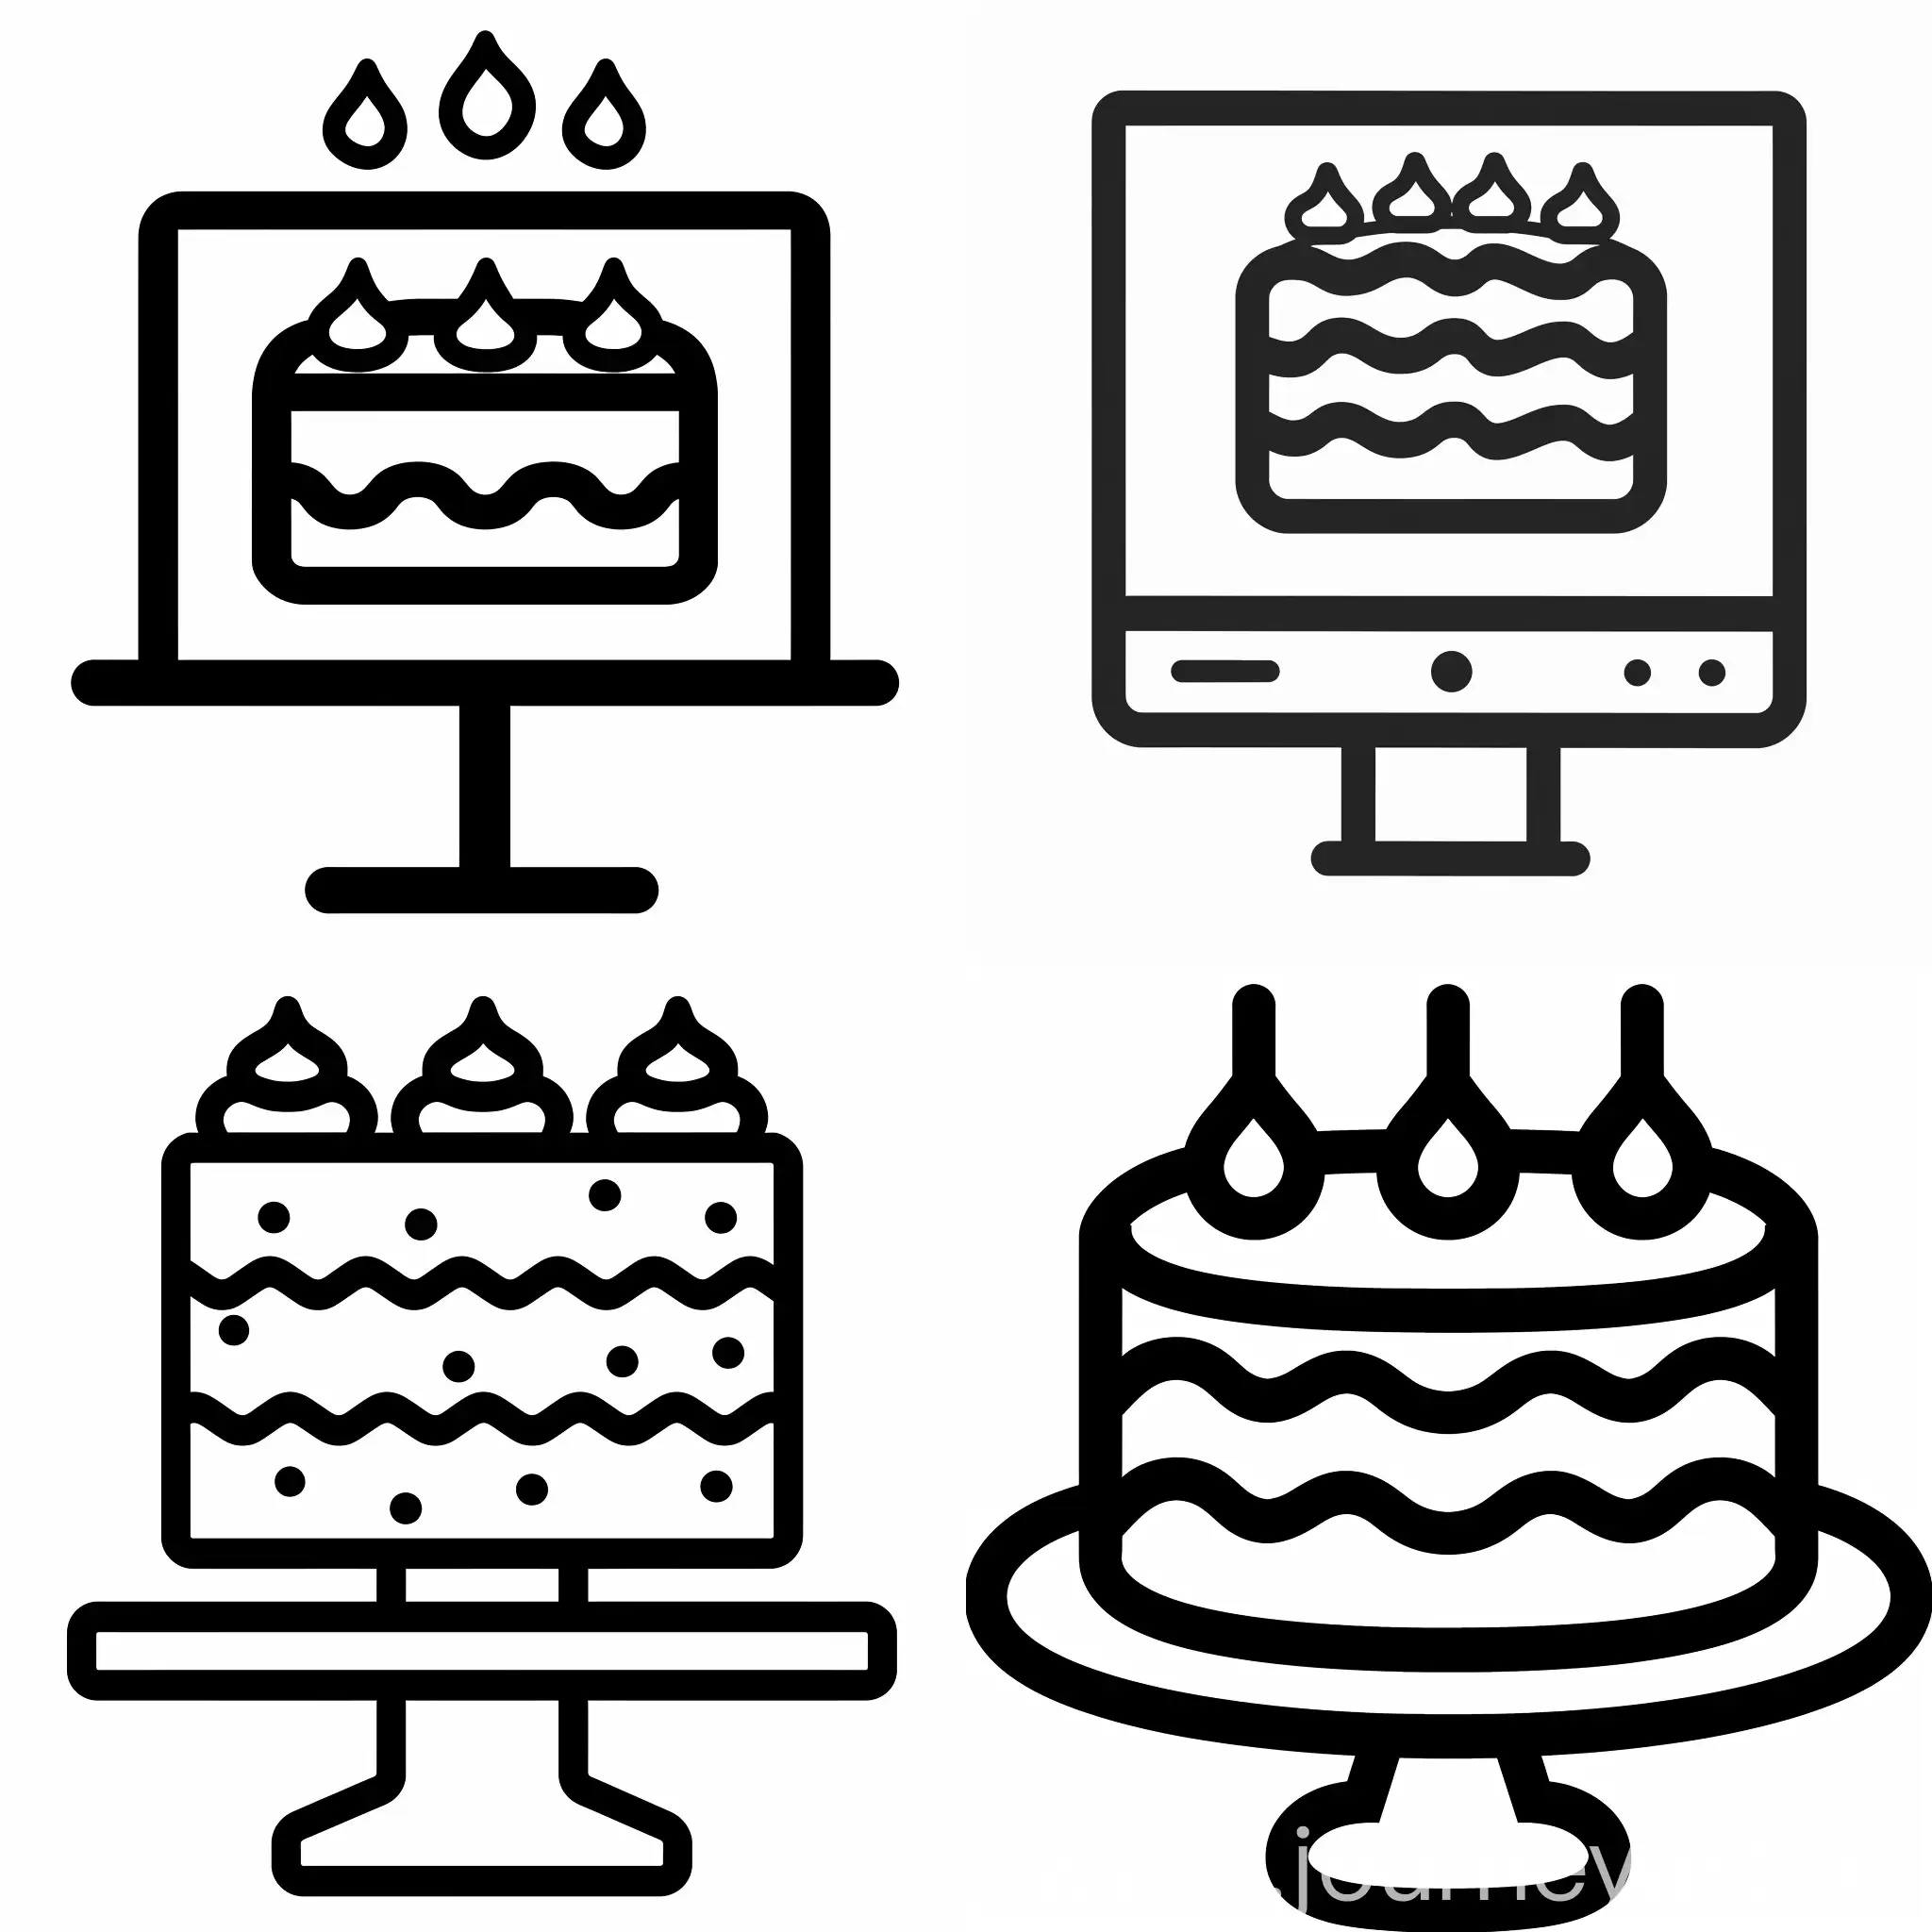 Computer-Cake-Icon-with-UX-and-Allergen-Category-Symbols-in-Black-and-White-Outline